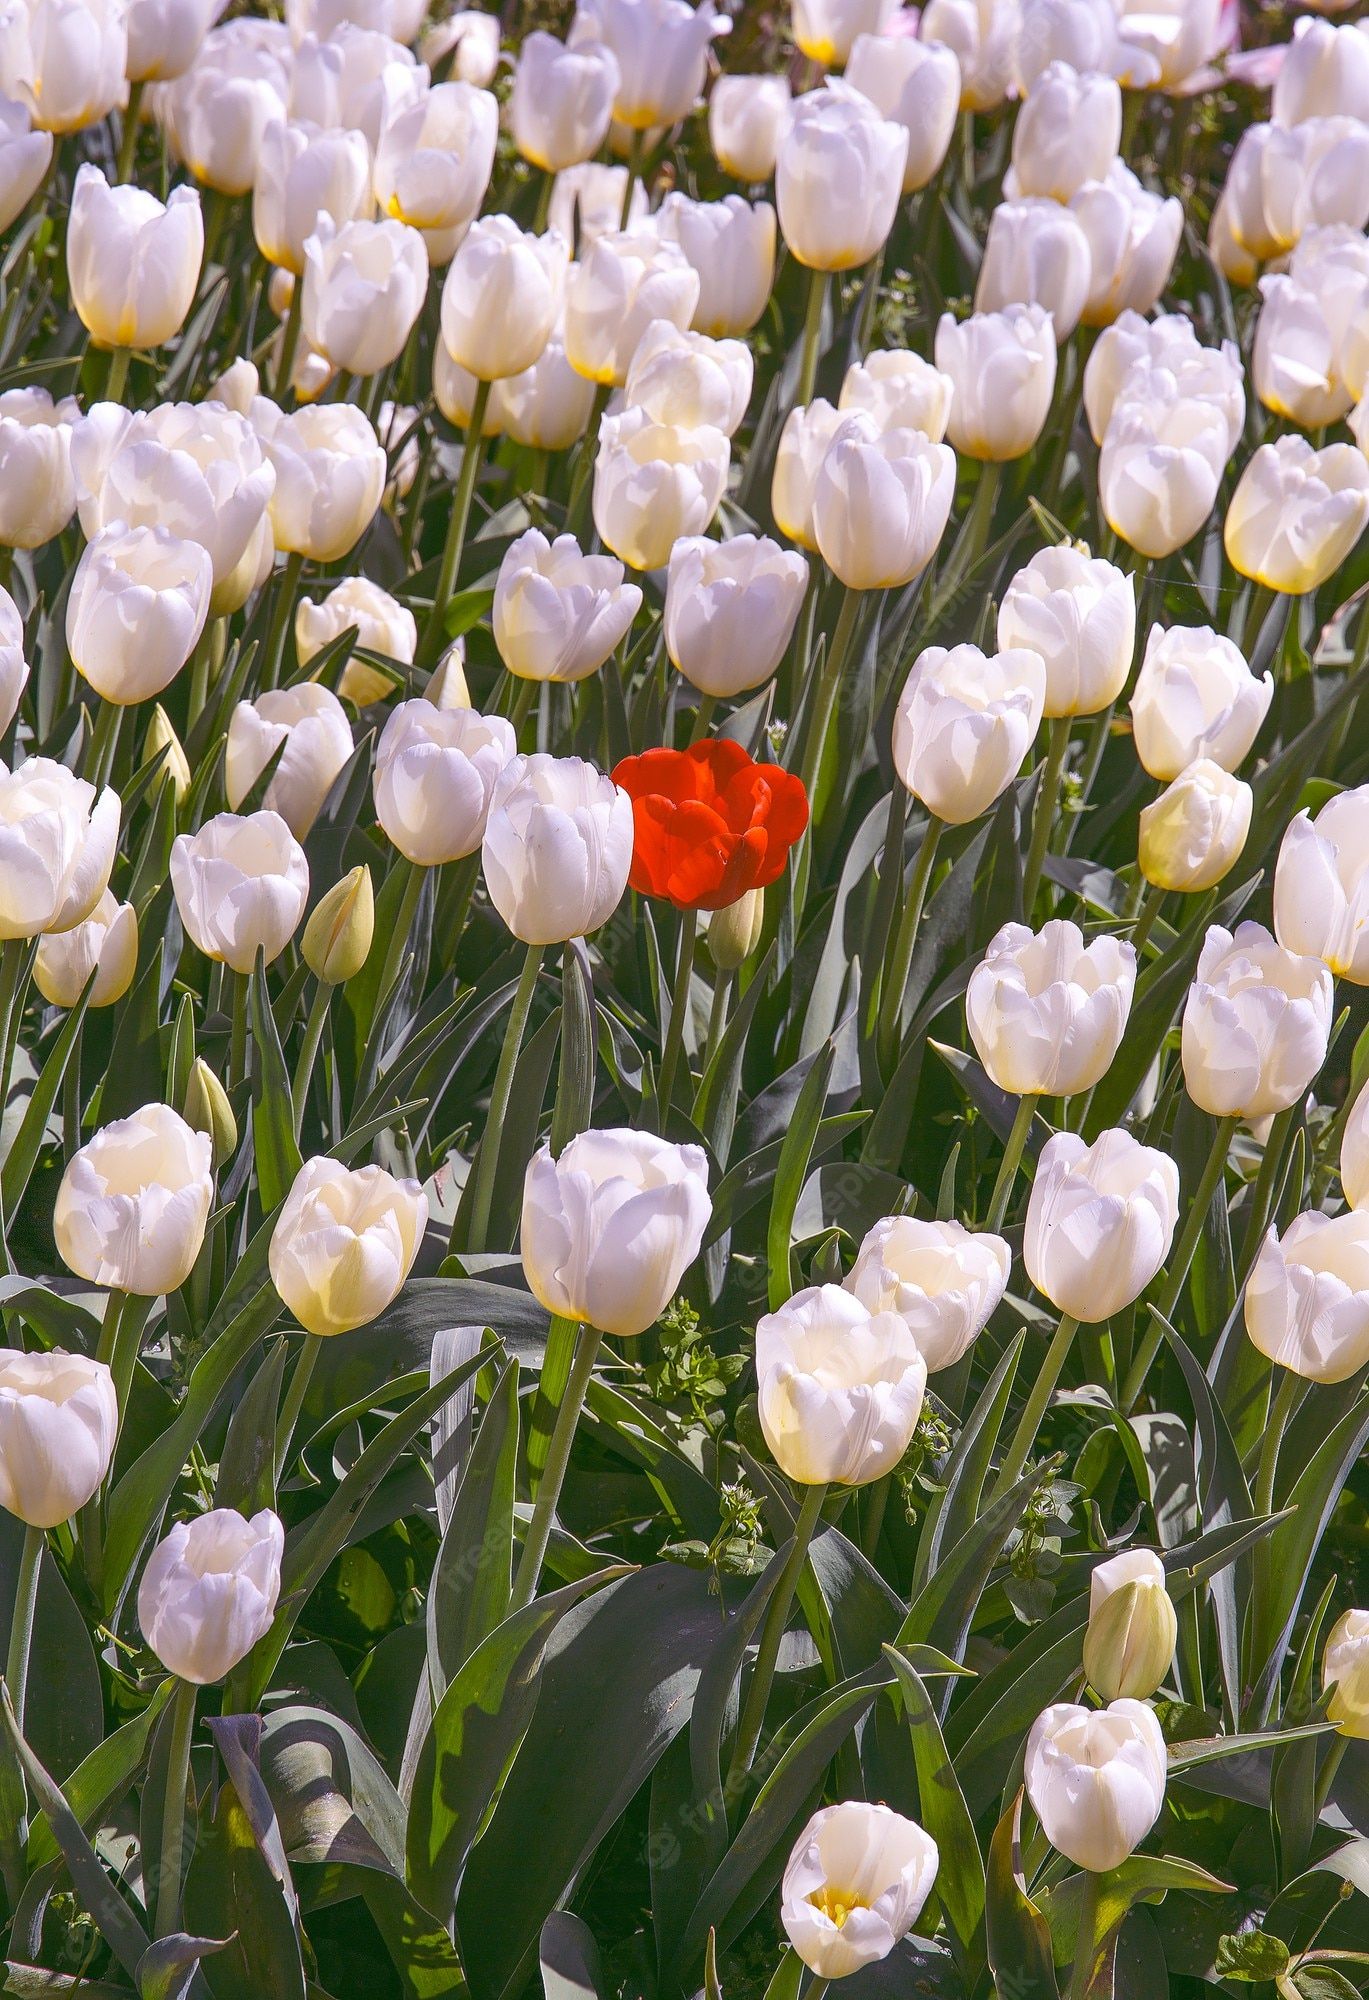 A red flower is in the middle of white flowers - Tulip